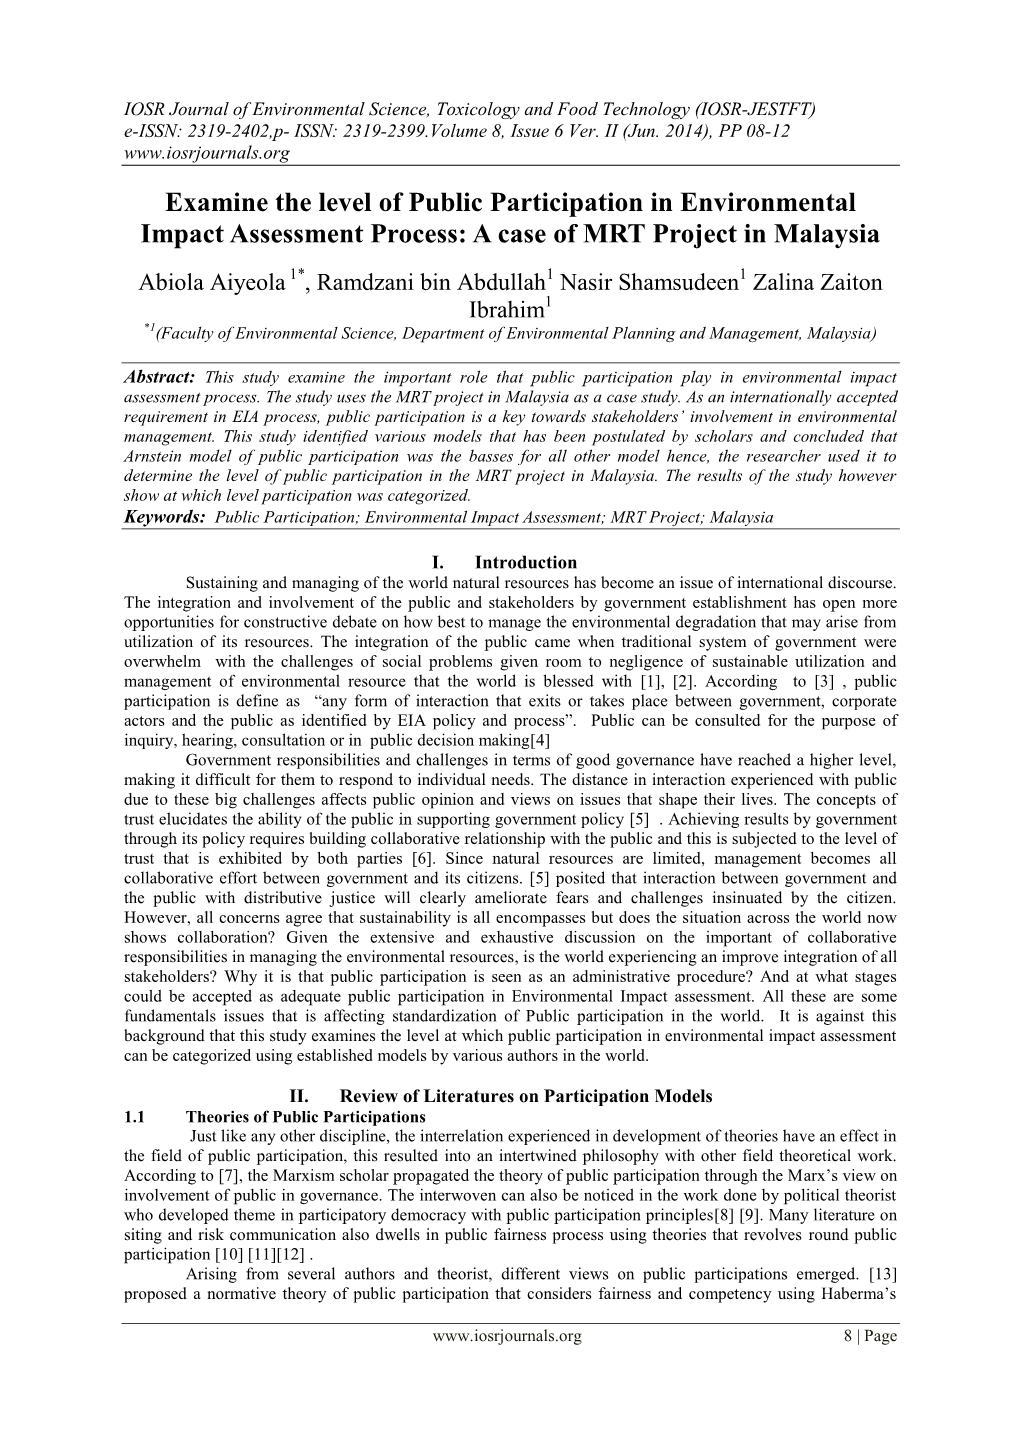 Examine the Level of Public Participation in Environmental Impact Assessment Process: a Case of MRT Project in Malaysia